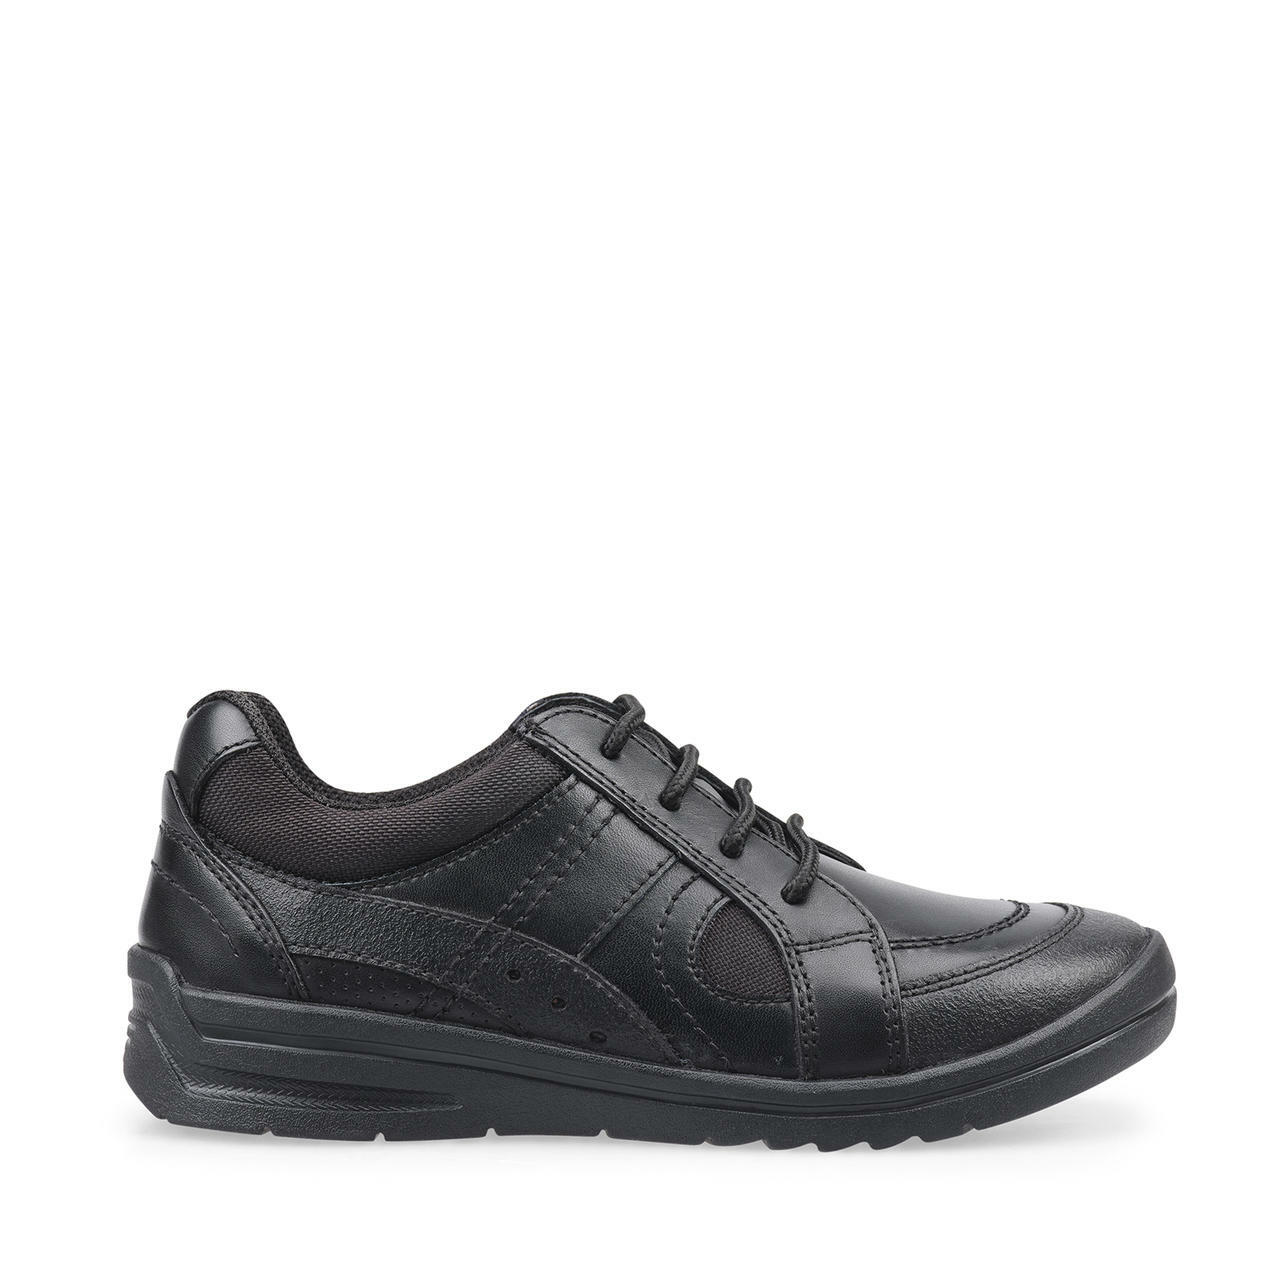 A boys casual school shoe by Start Rite, style Yo Yo,in black leather with lace up fastening. Right side view.